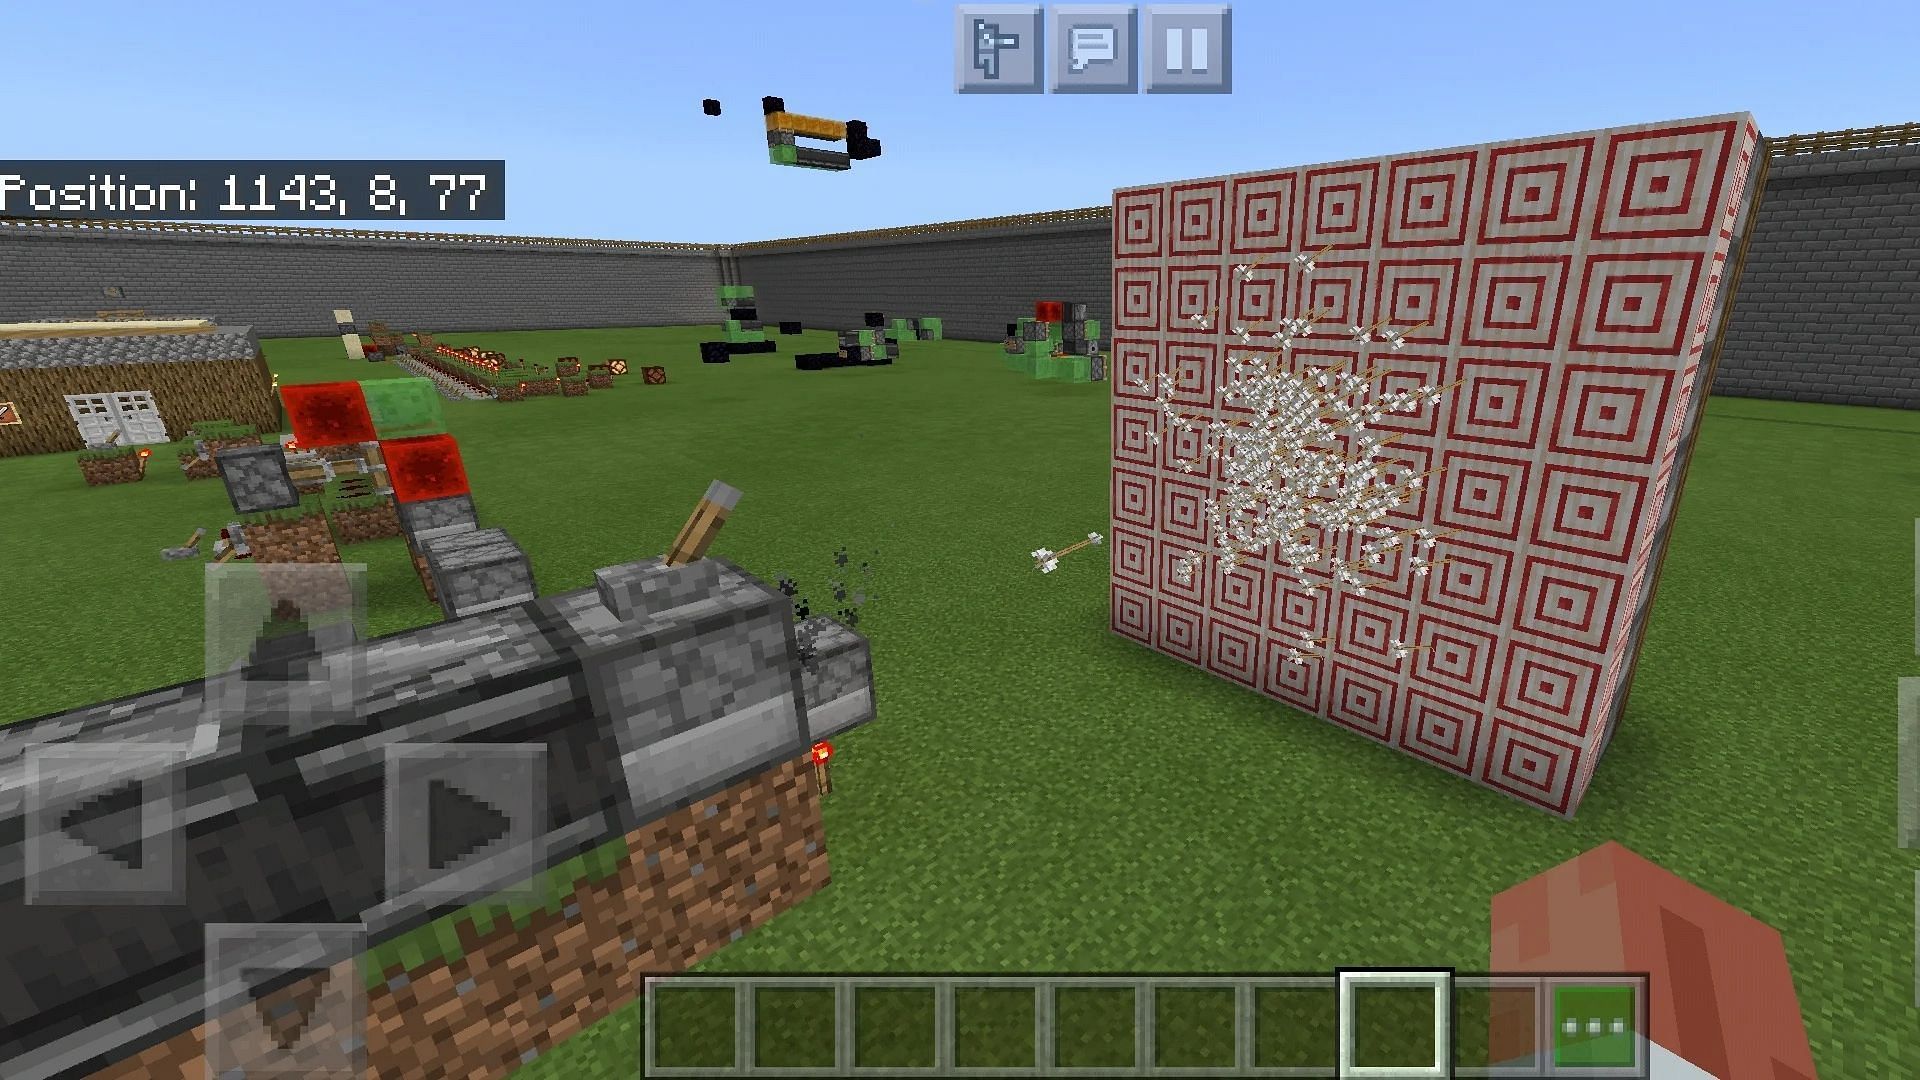 A dispenser can be used to shoot arrows in Minecraft 1.19 (Image via u/tblnick Reddit)